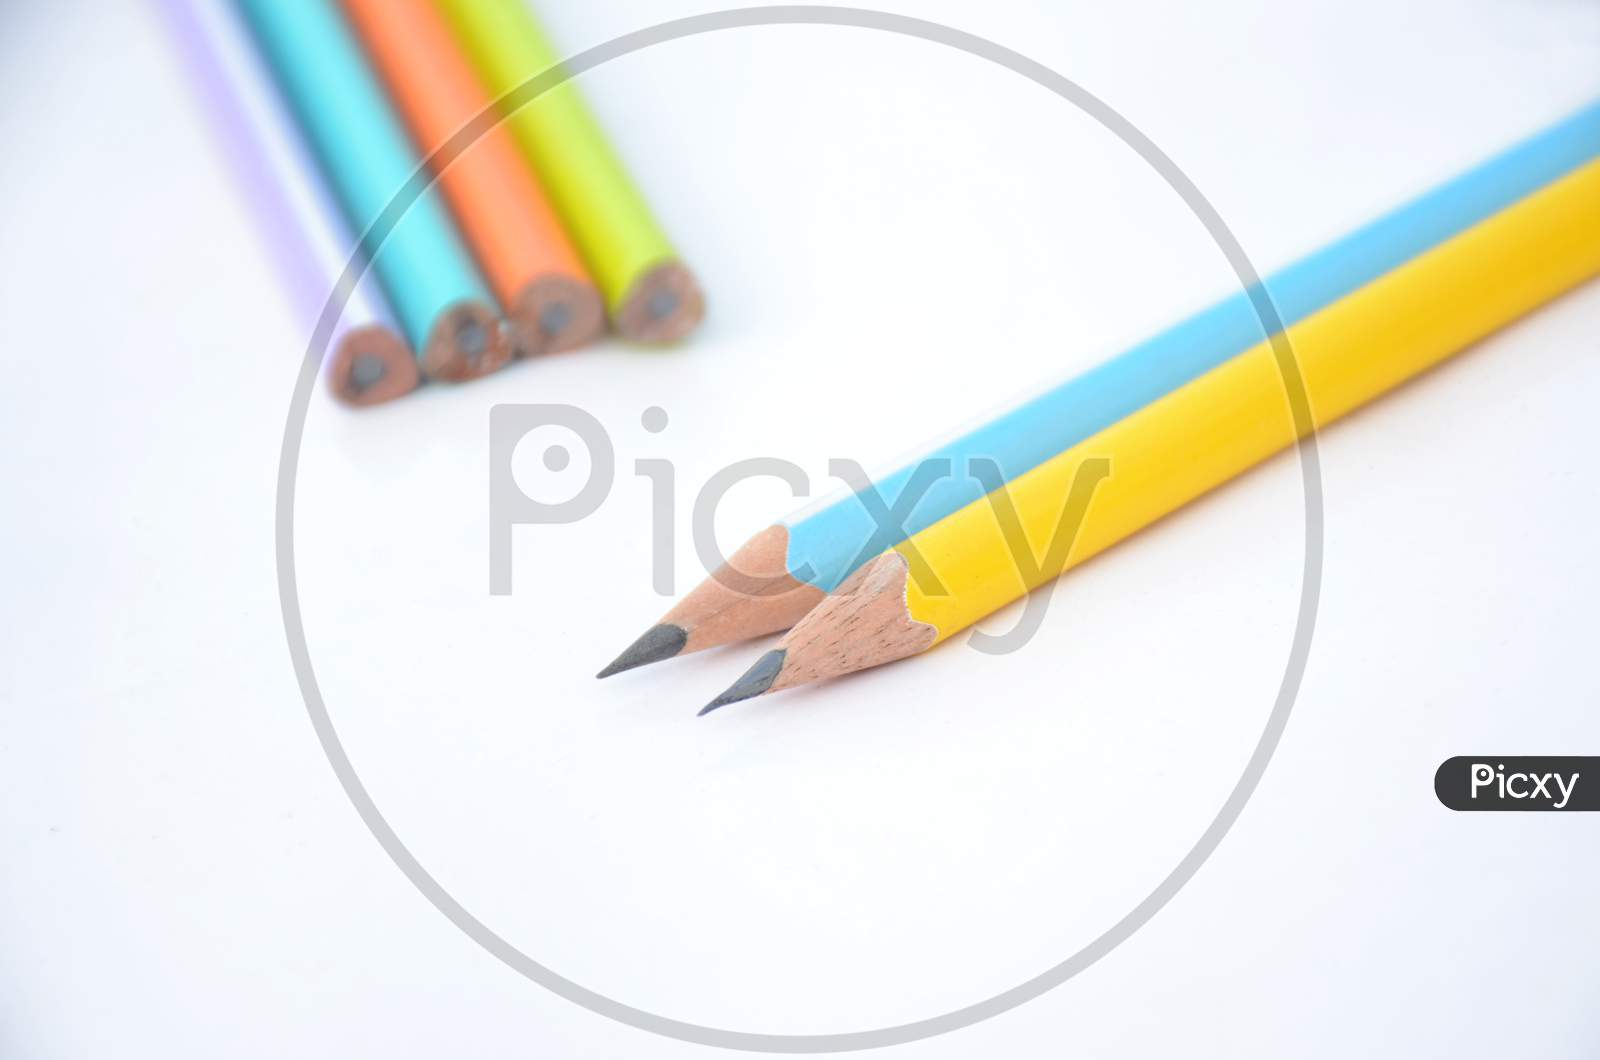 The Yellow Sky Peels Pencil With Bunch The Pencils Isolated On White Background.